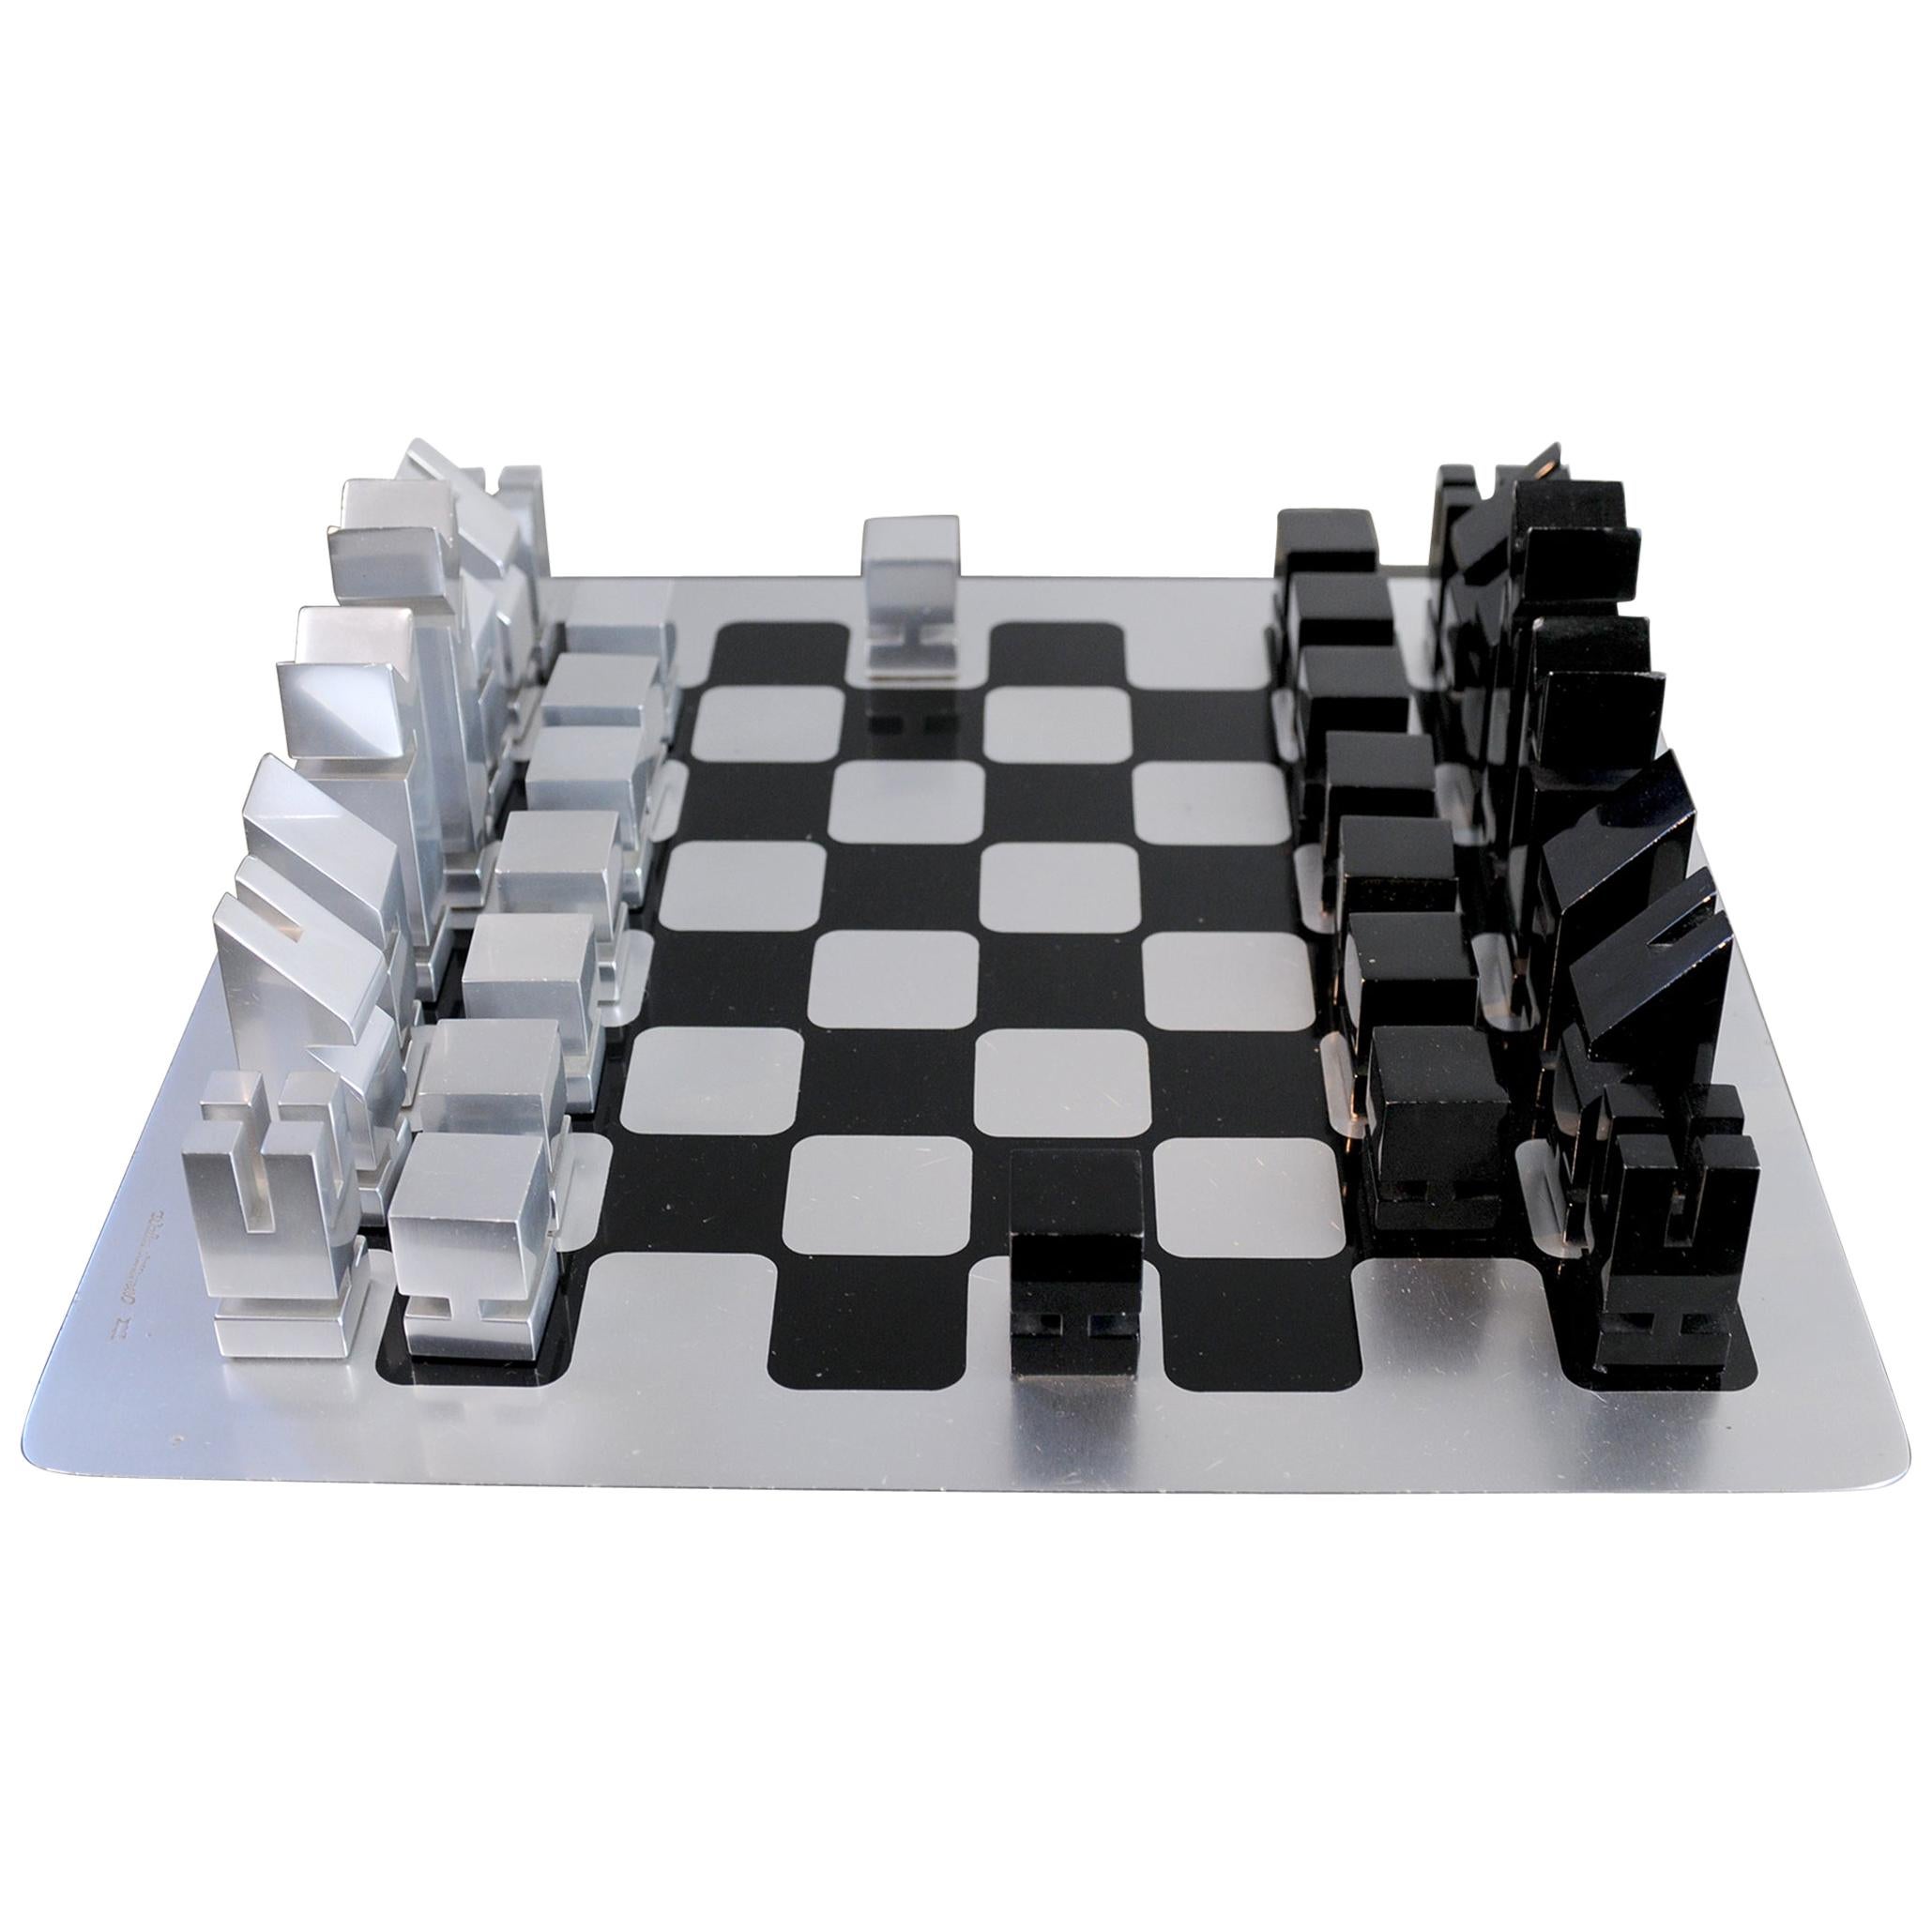 Chess Set by Walter and Moretti, No. 1 of Pre-Production, France, 1970